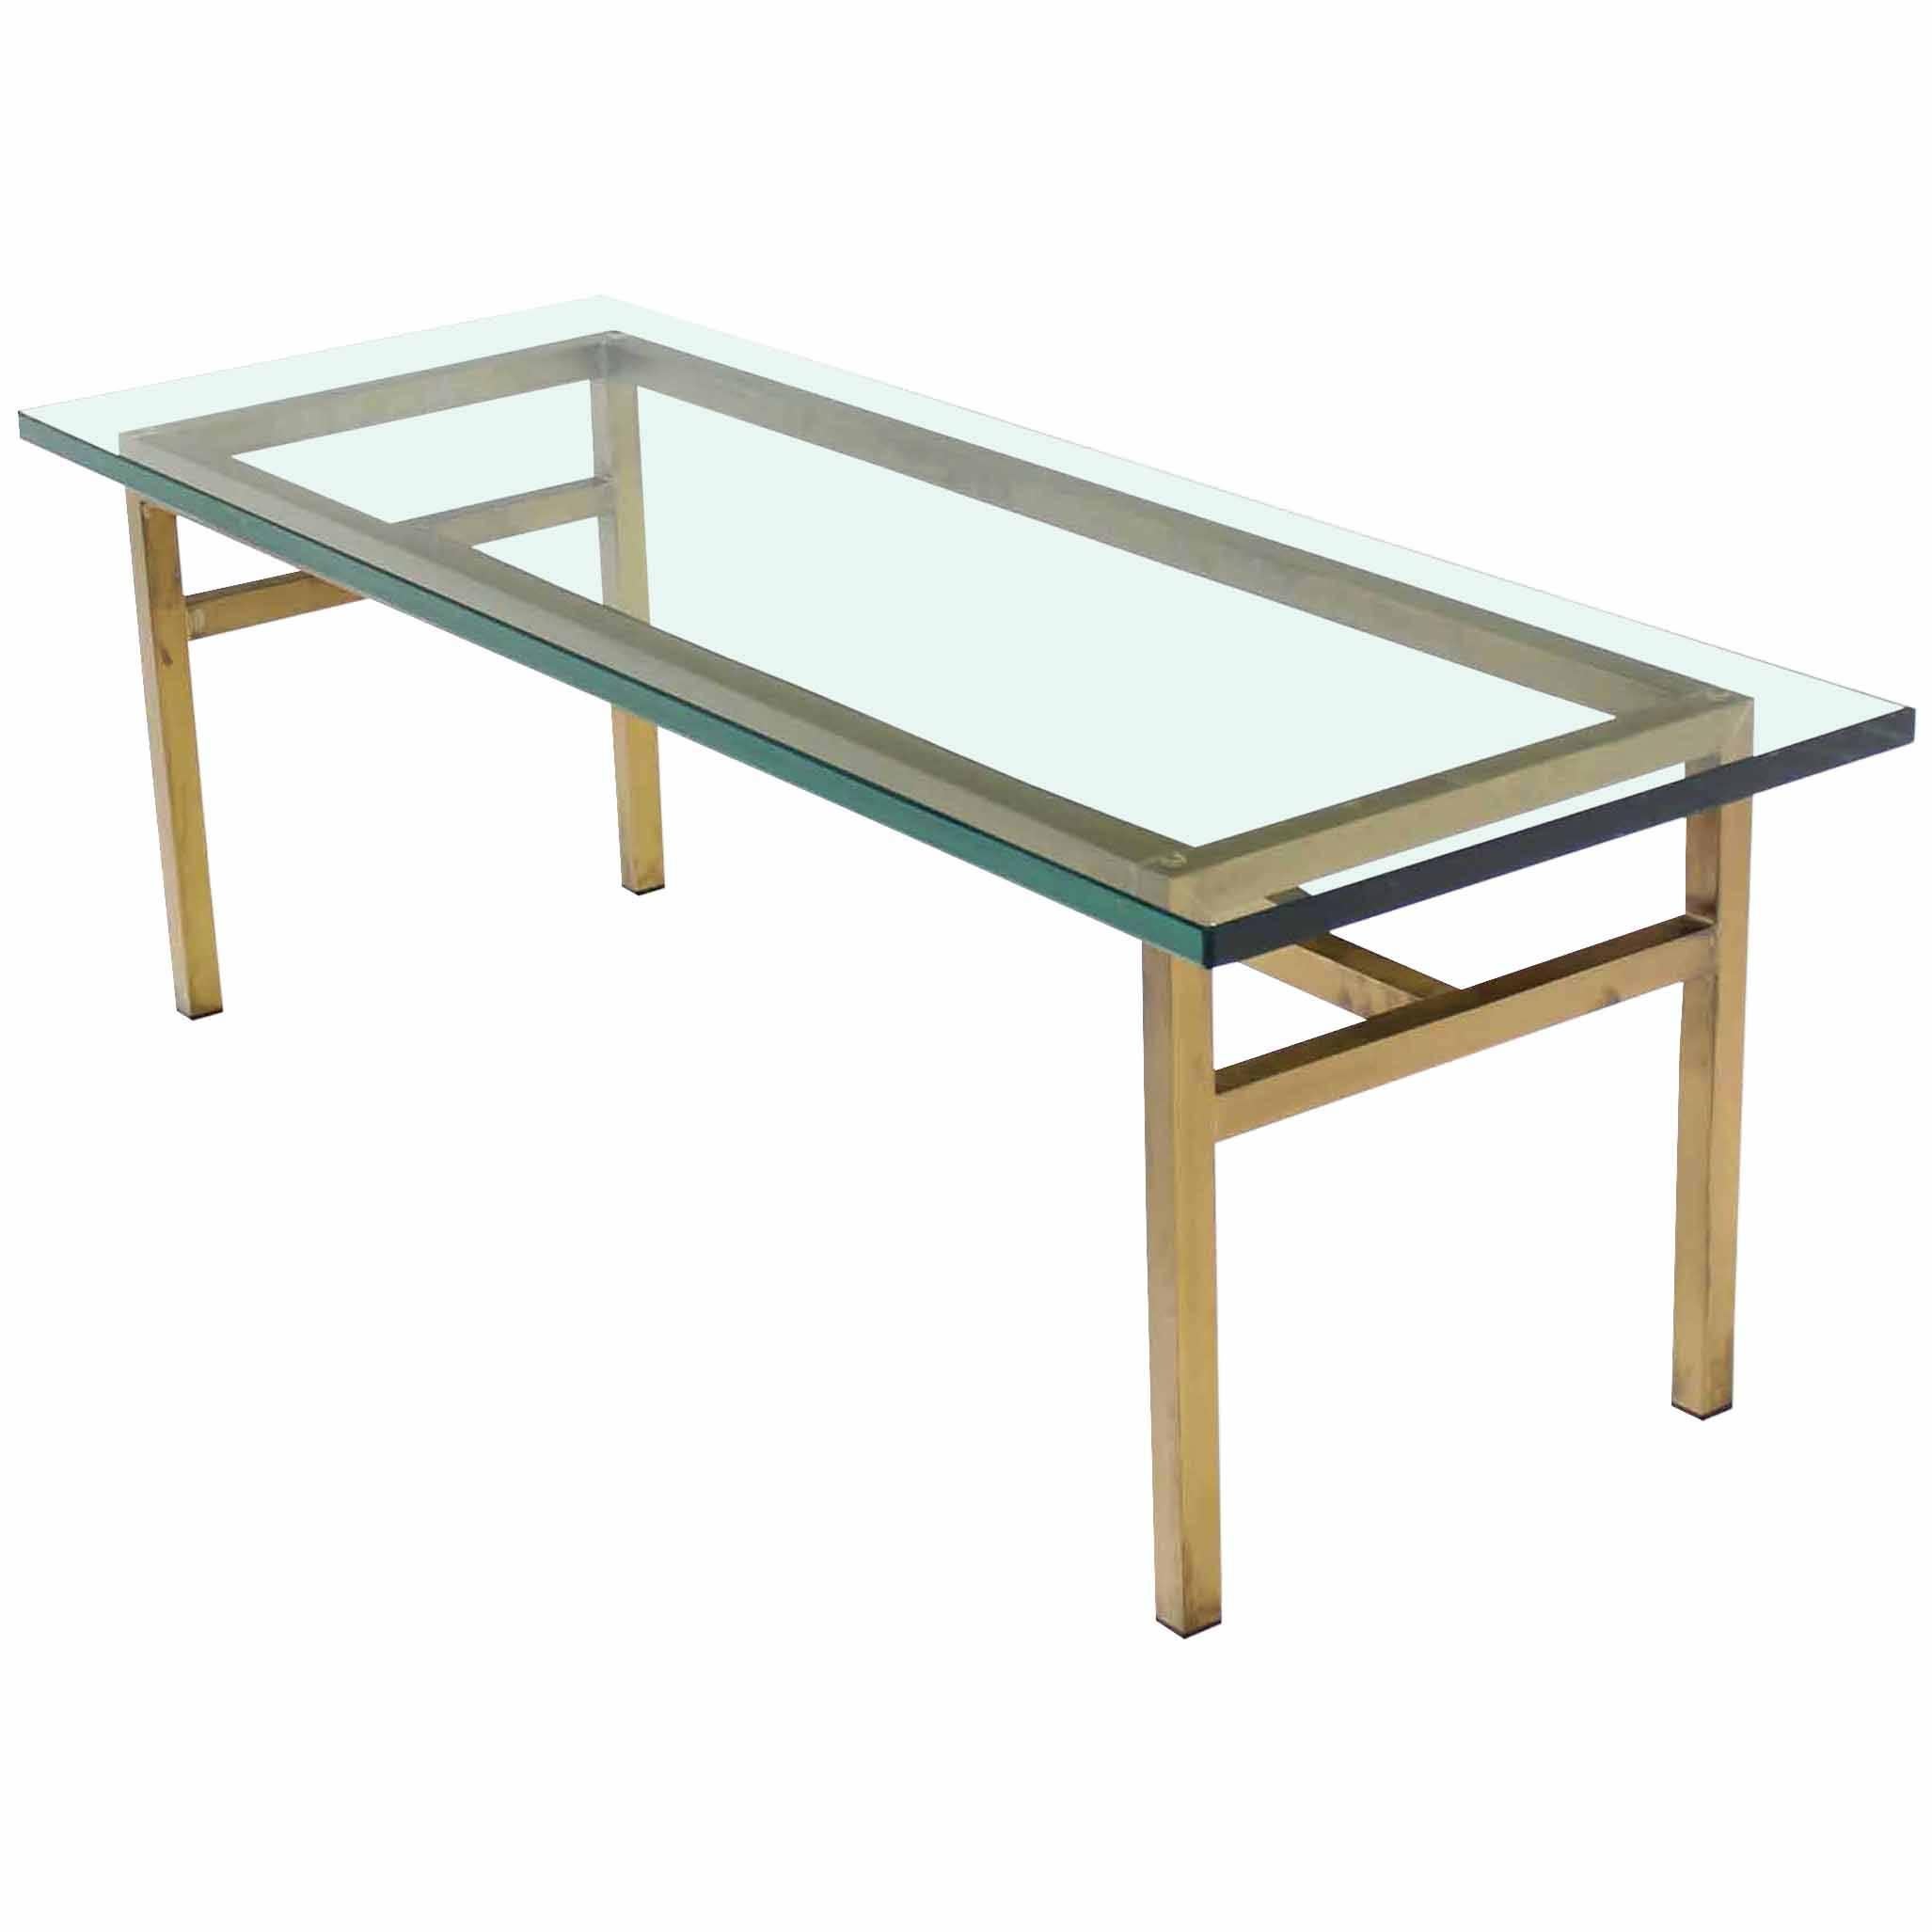 Soldered Square Solid Brass Bar Rectangular Coffee Table Thick Glass Top